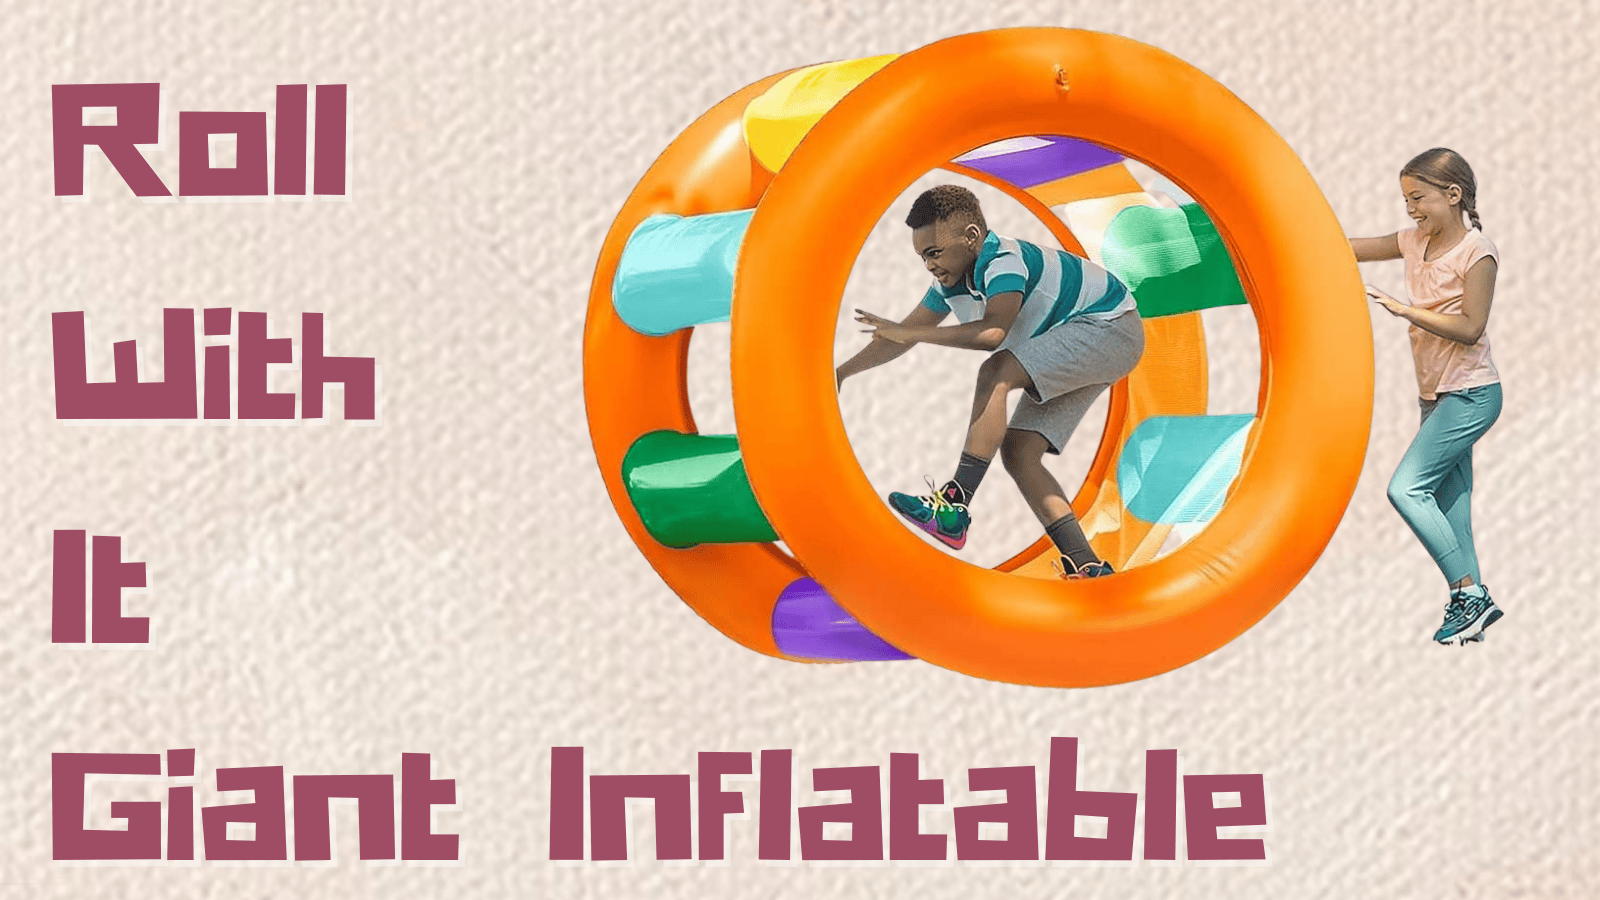 Roll with it giant inflatable wheel